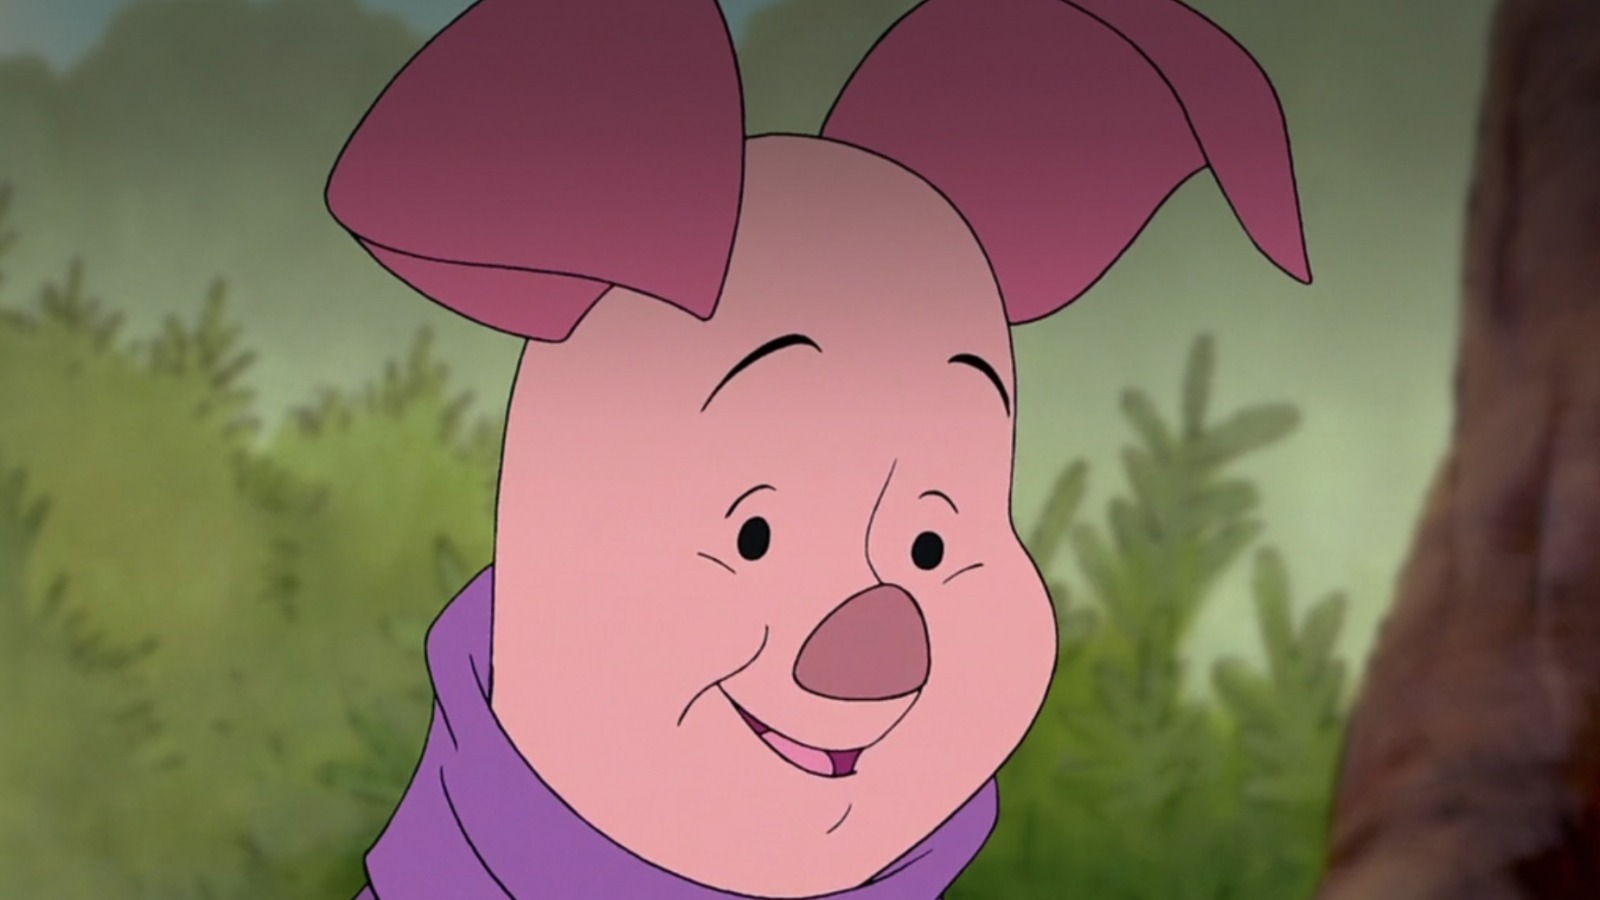 15 Most Popular Winnie The Pooh Characters Ranked Worst To Best